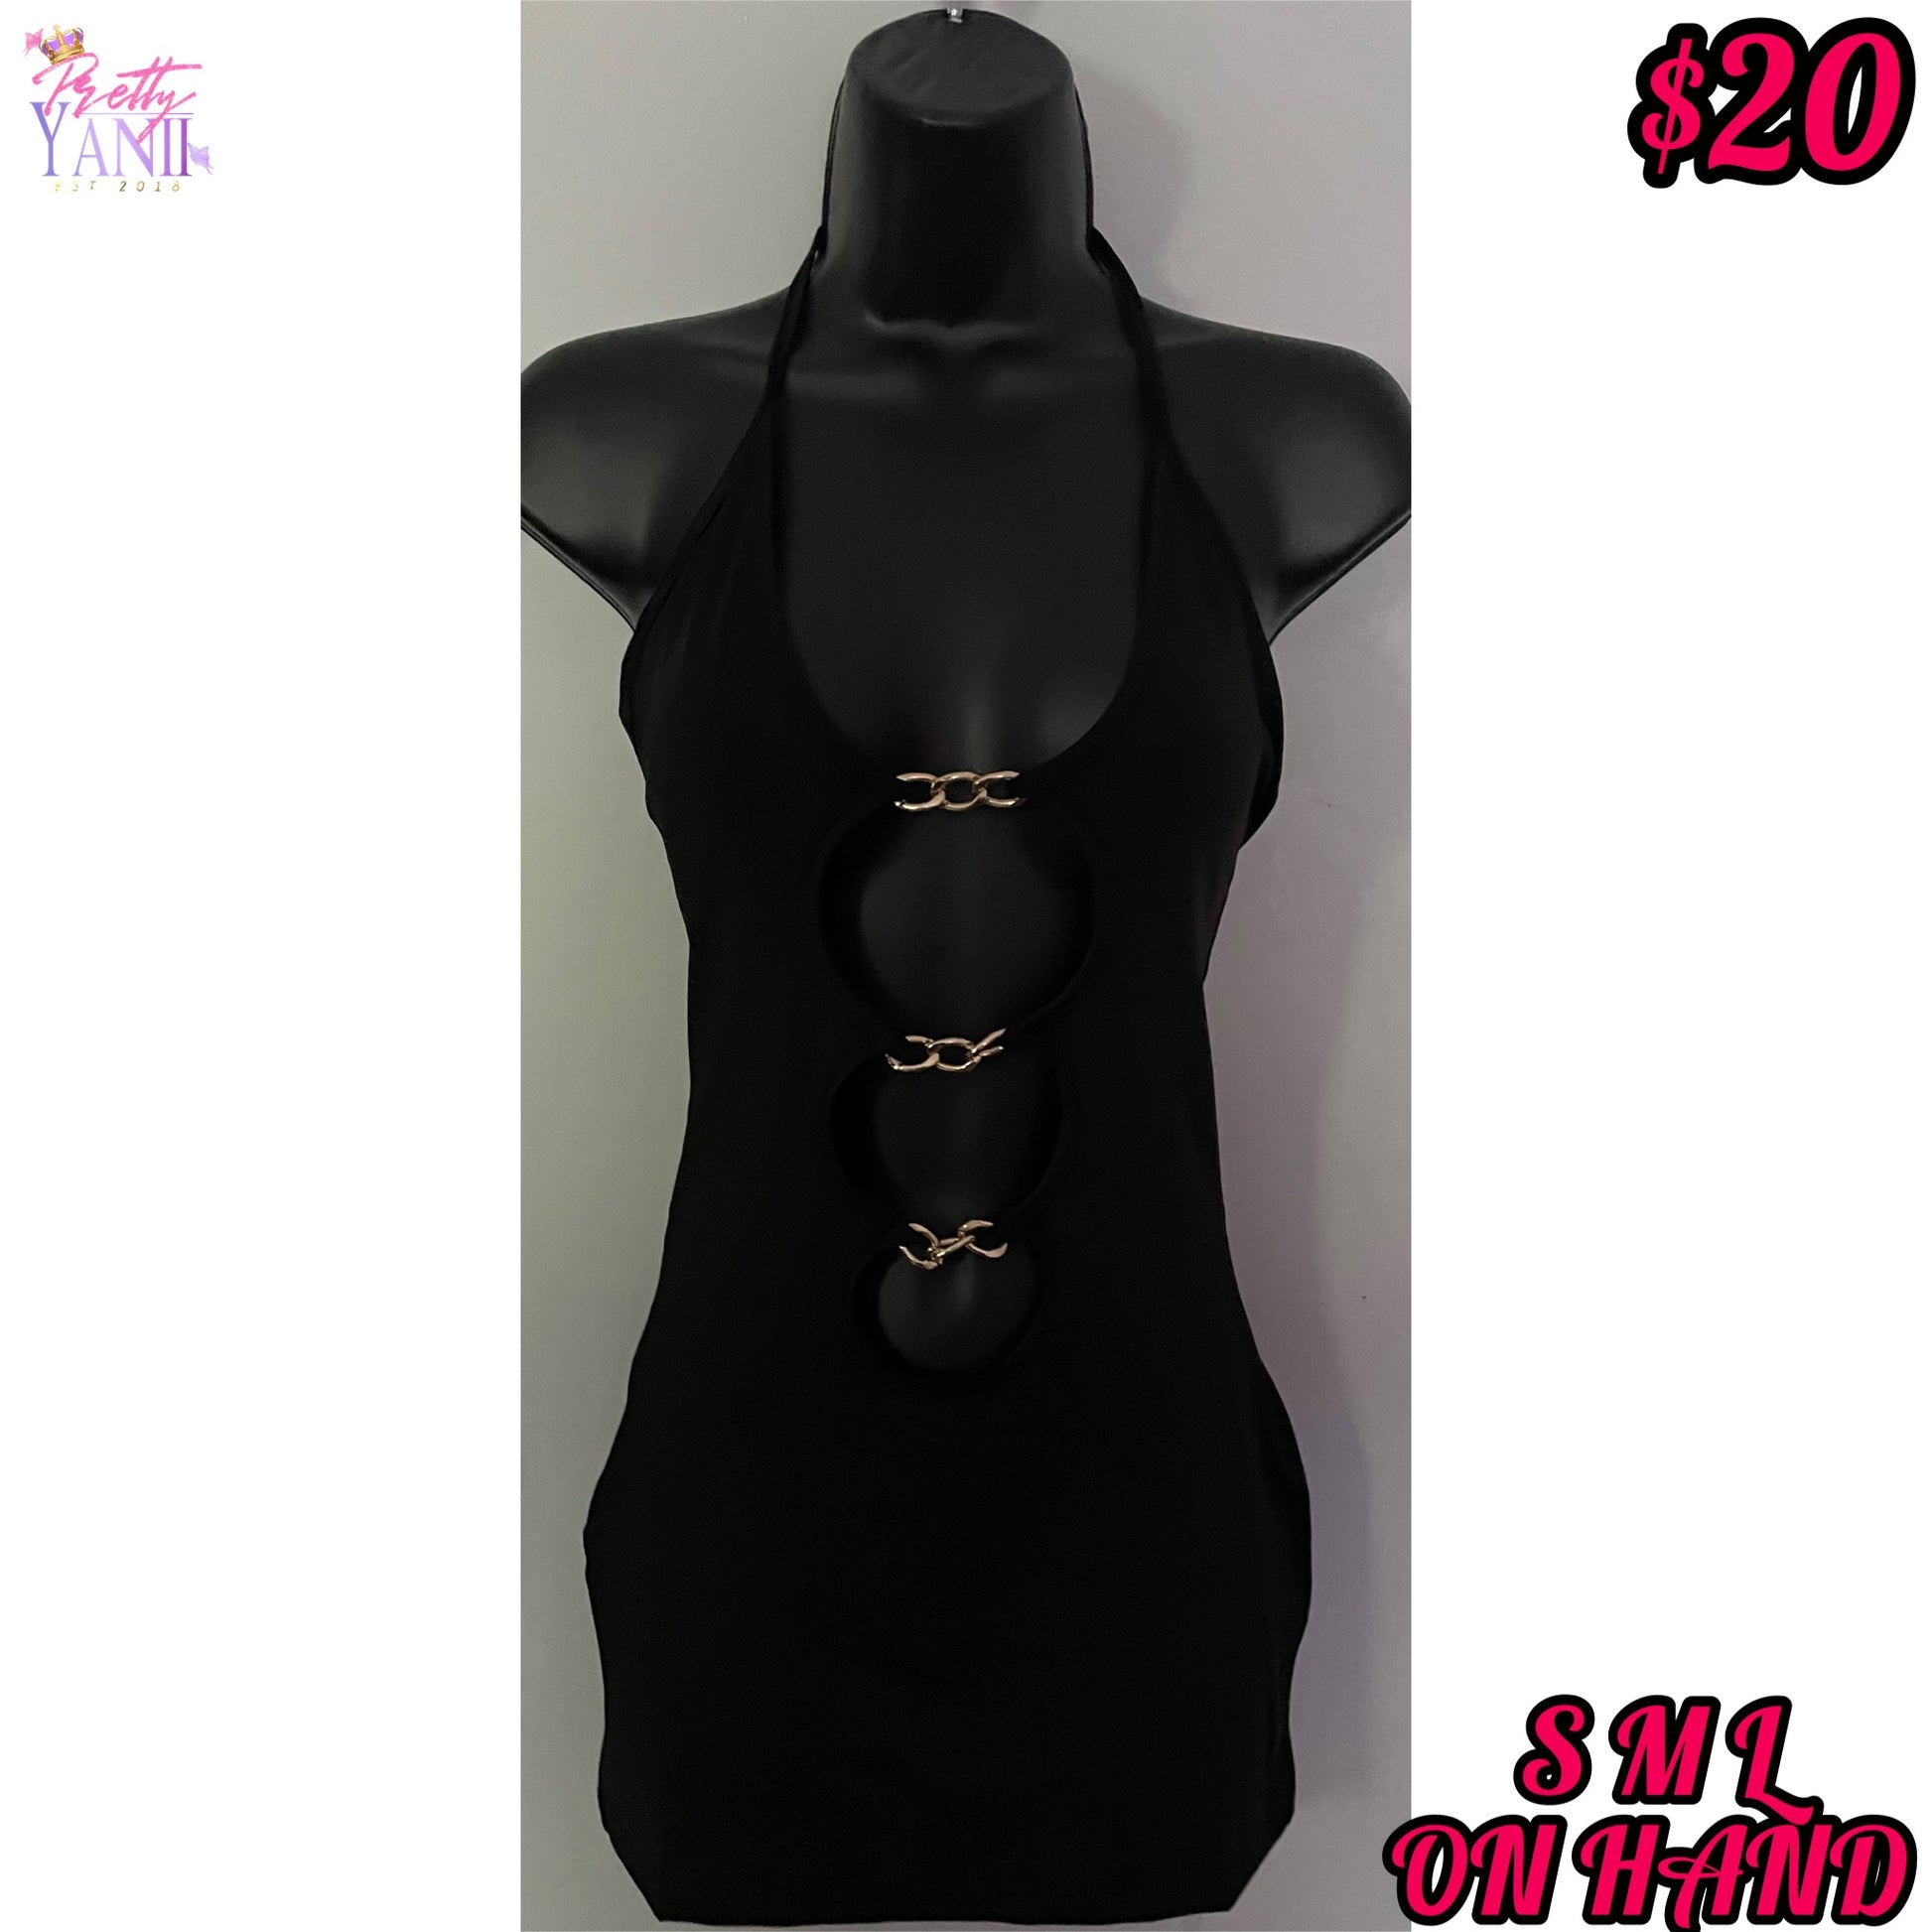 a halter neckline and a chain cut-out design, available in black